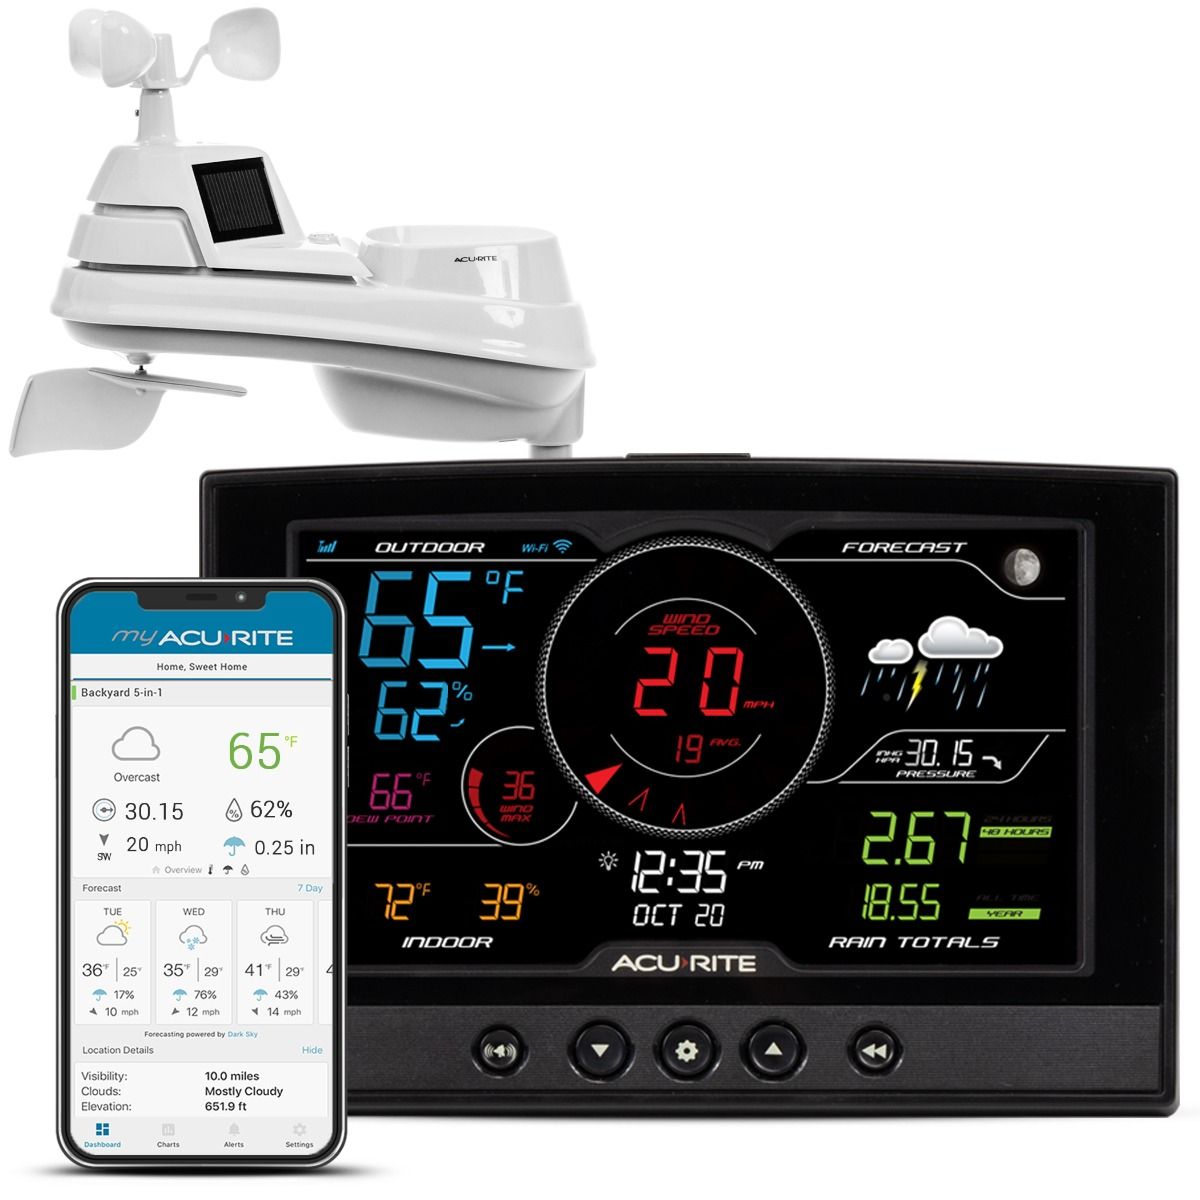 Acurite Iris Weather Station with Wireless Display for Temperature, Humidity, Wind Speed, Wind Direction, Historic Rainfall Totals, and Hyperlocal